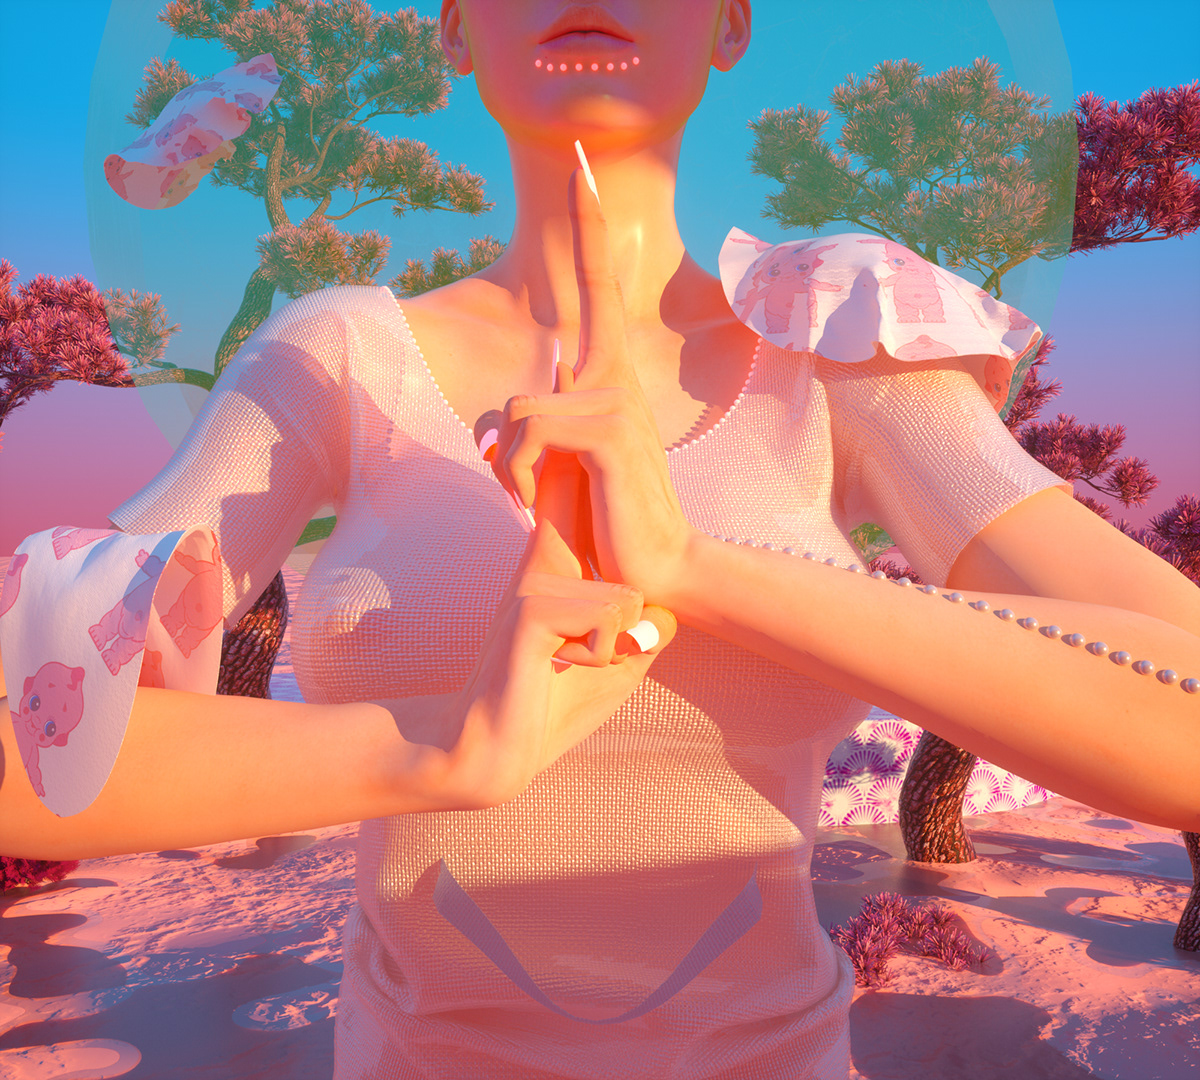 contra game pink c4d freestyle universe girl